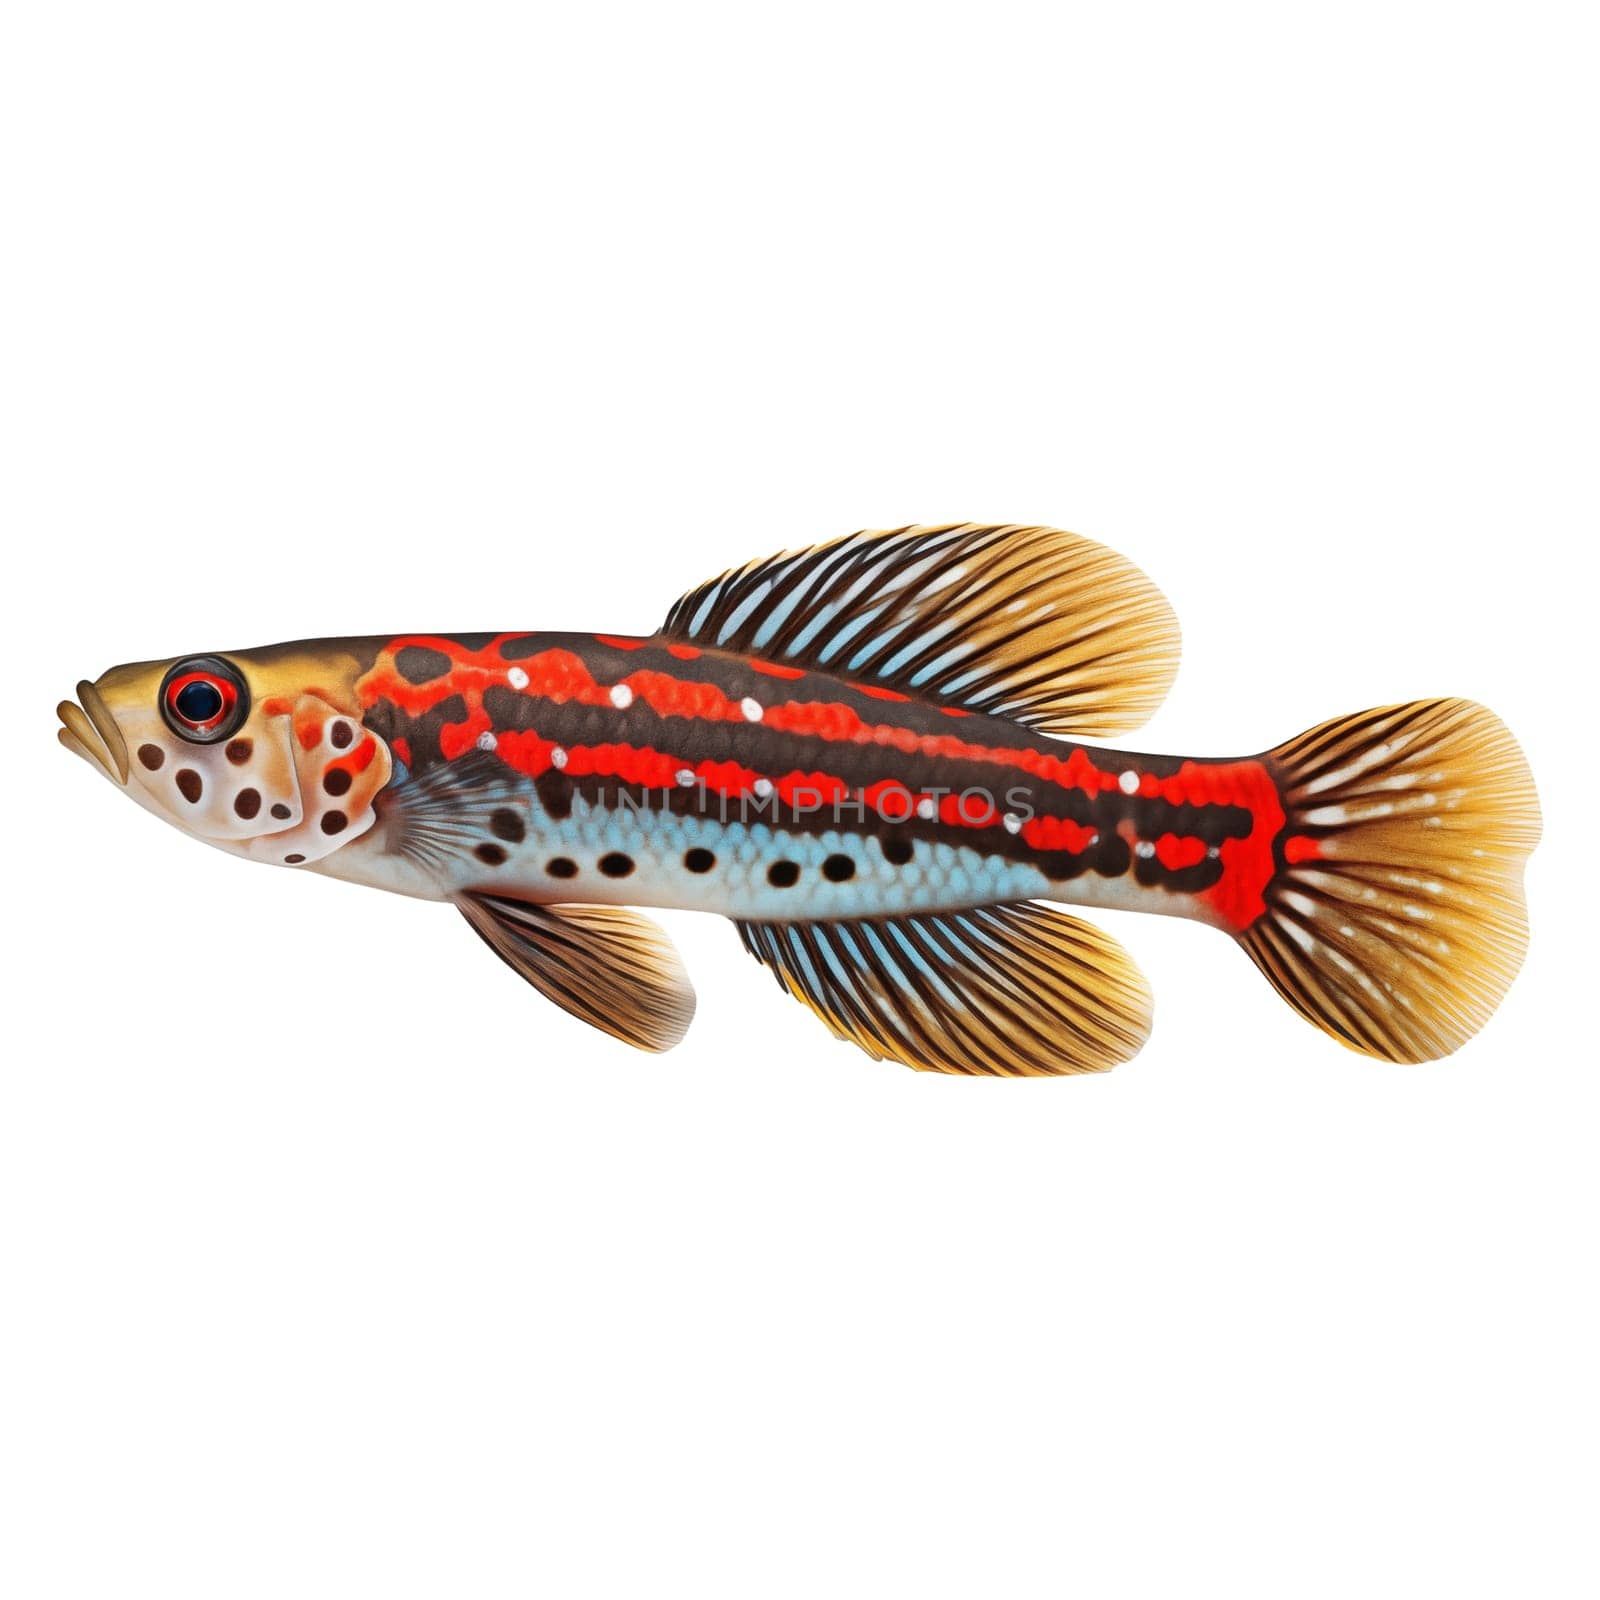 Multicolored aquarium fish on a transparent background, side view. The Firetail Goby, an red and blue saltwater aquarium fish, isolated on a white background, a design element for insertion by SERSOL